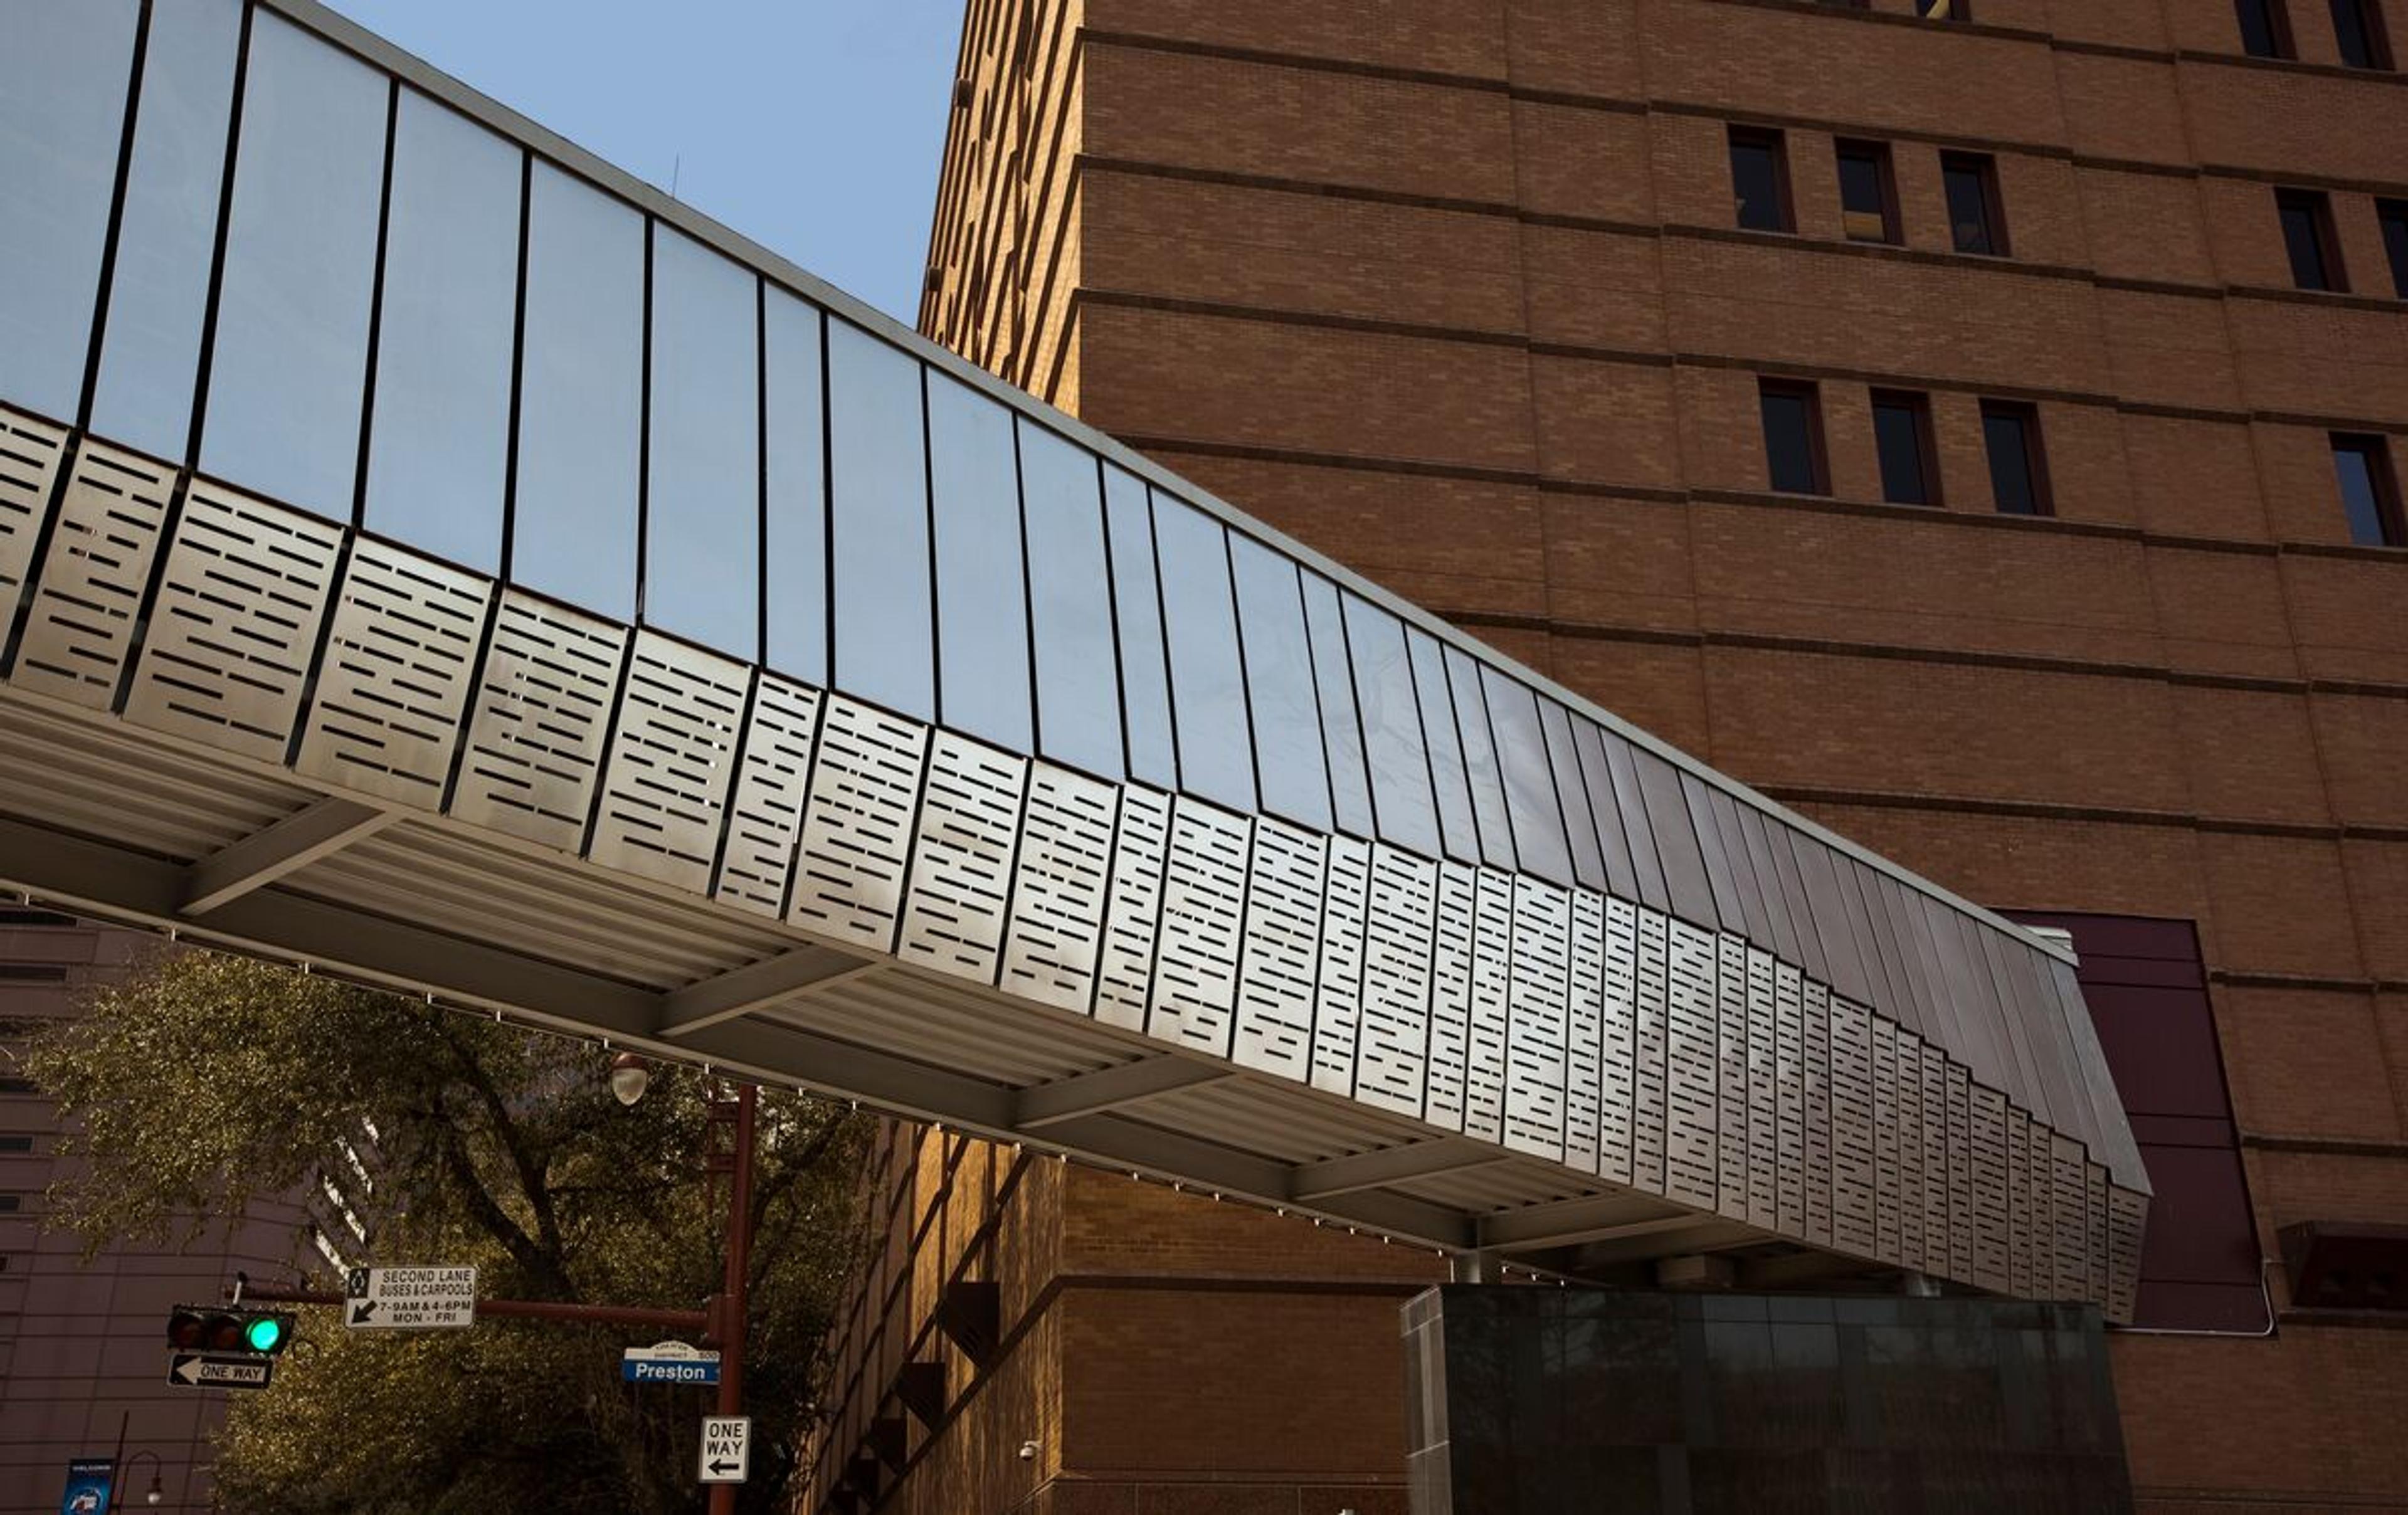 Custom pedestrian bridge in stainless steel • Custom eco-etch patterns bring the design to life • Downtown Houston, Texas